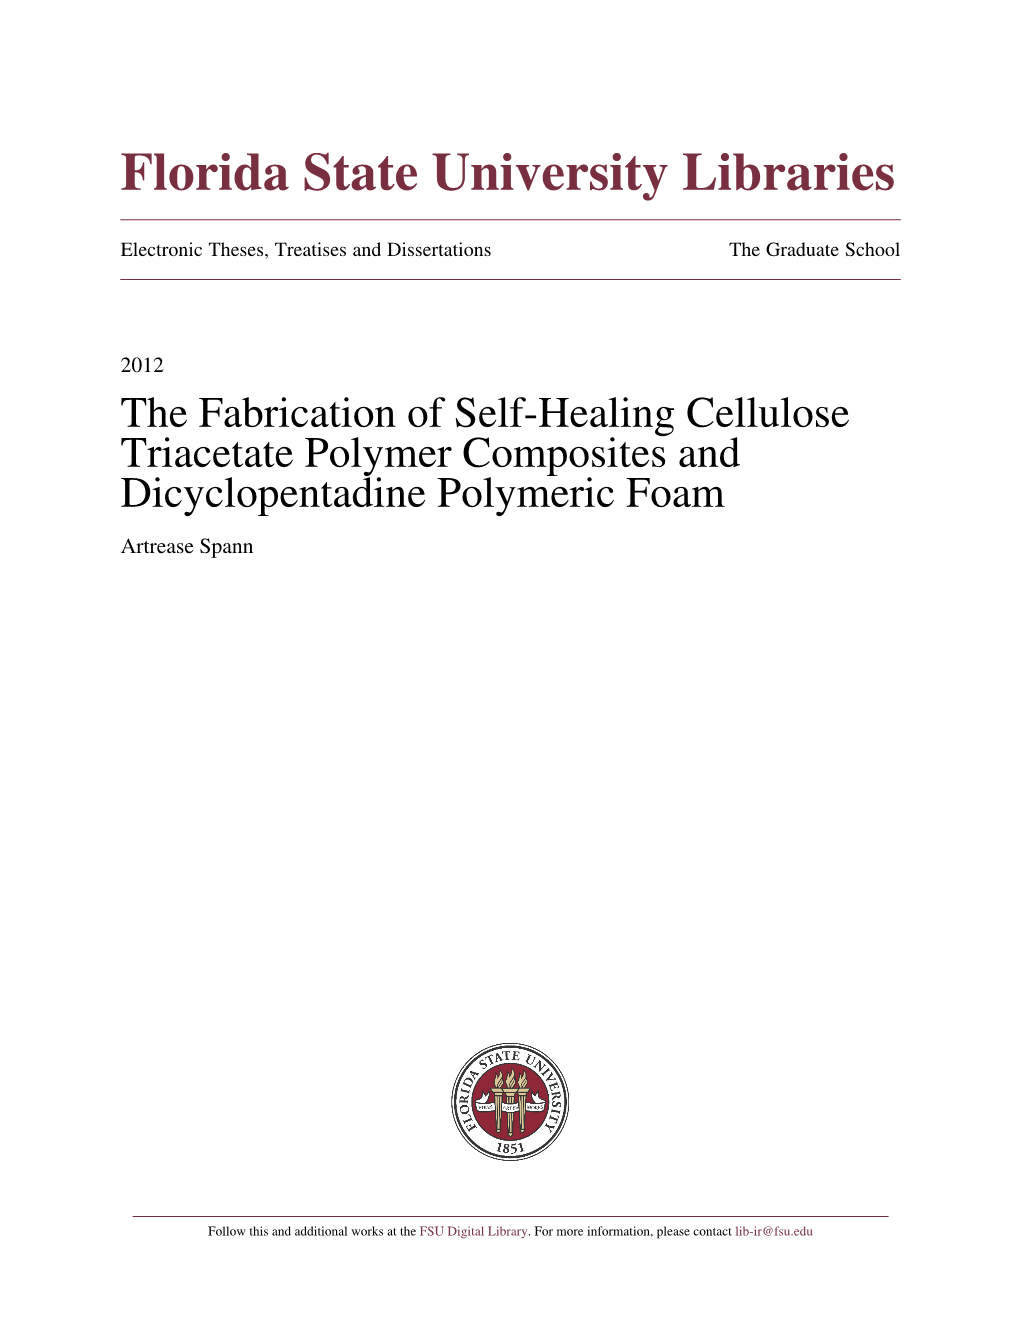 The Fabrication of Self-Healing Cellulose Triacetate Polymer Composites and Dicyclopentadine Polymeric Foam Artrease Spann